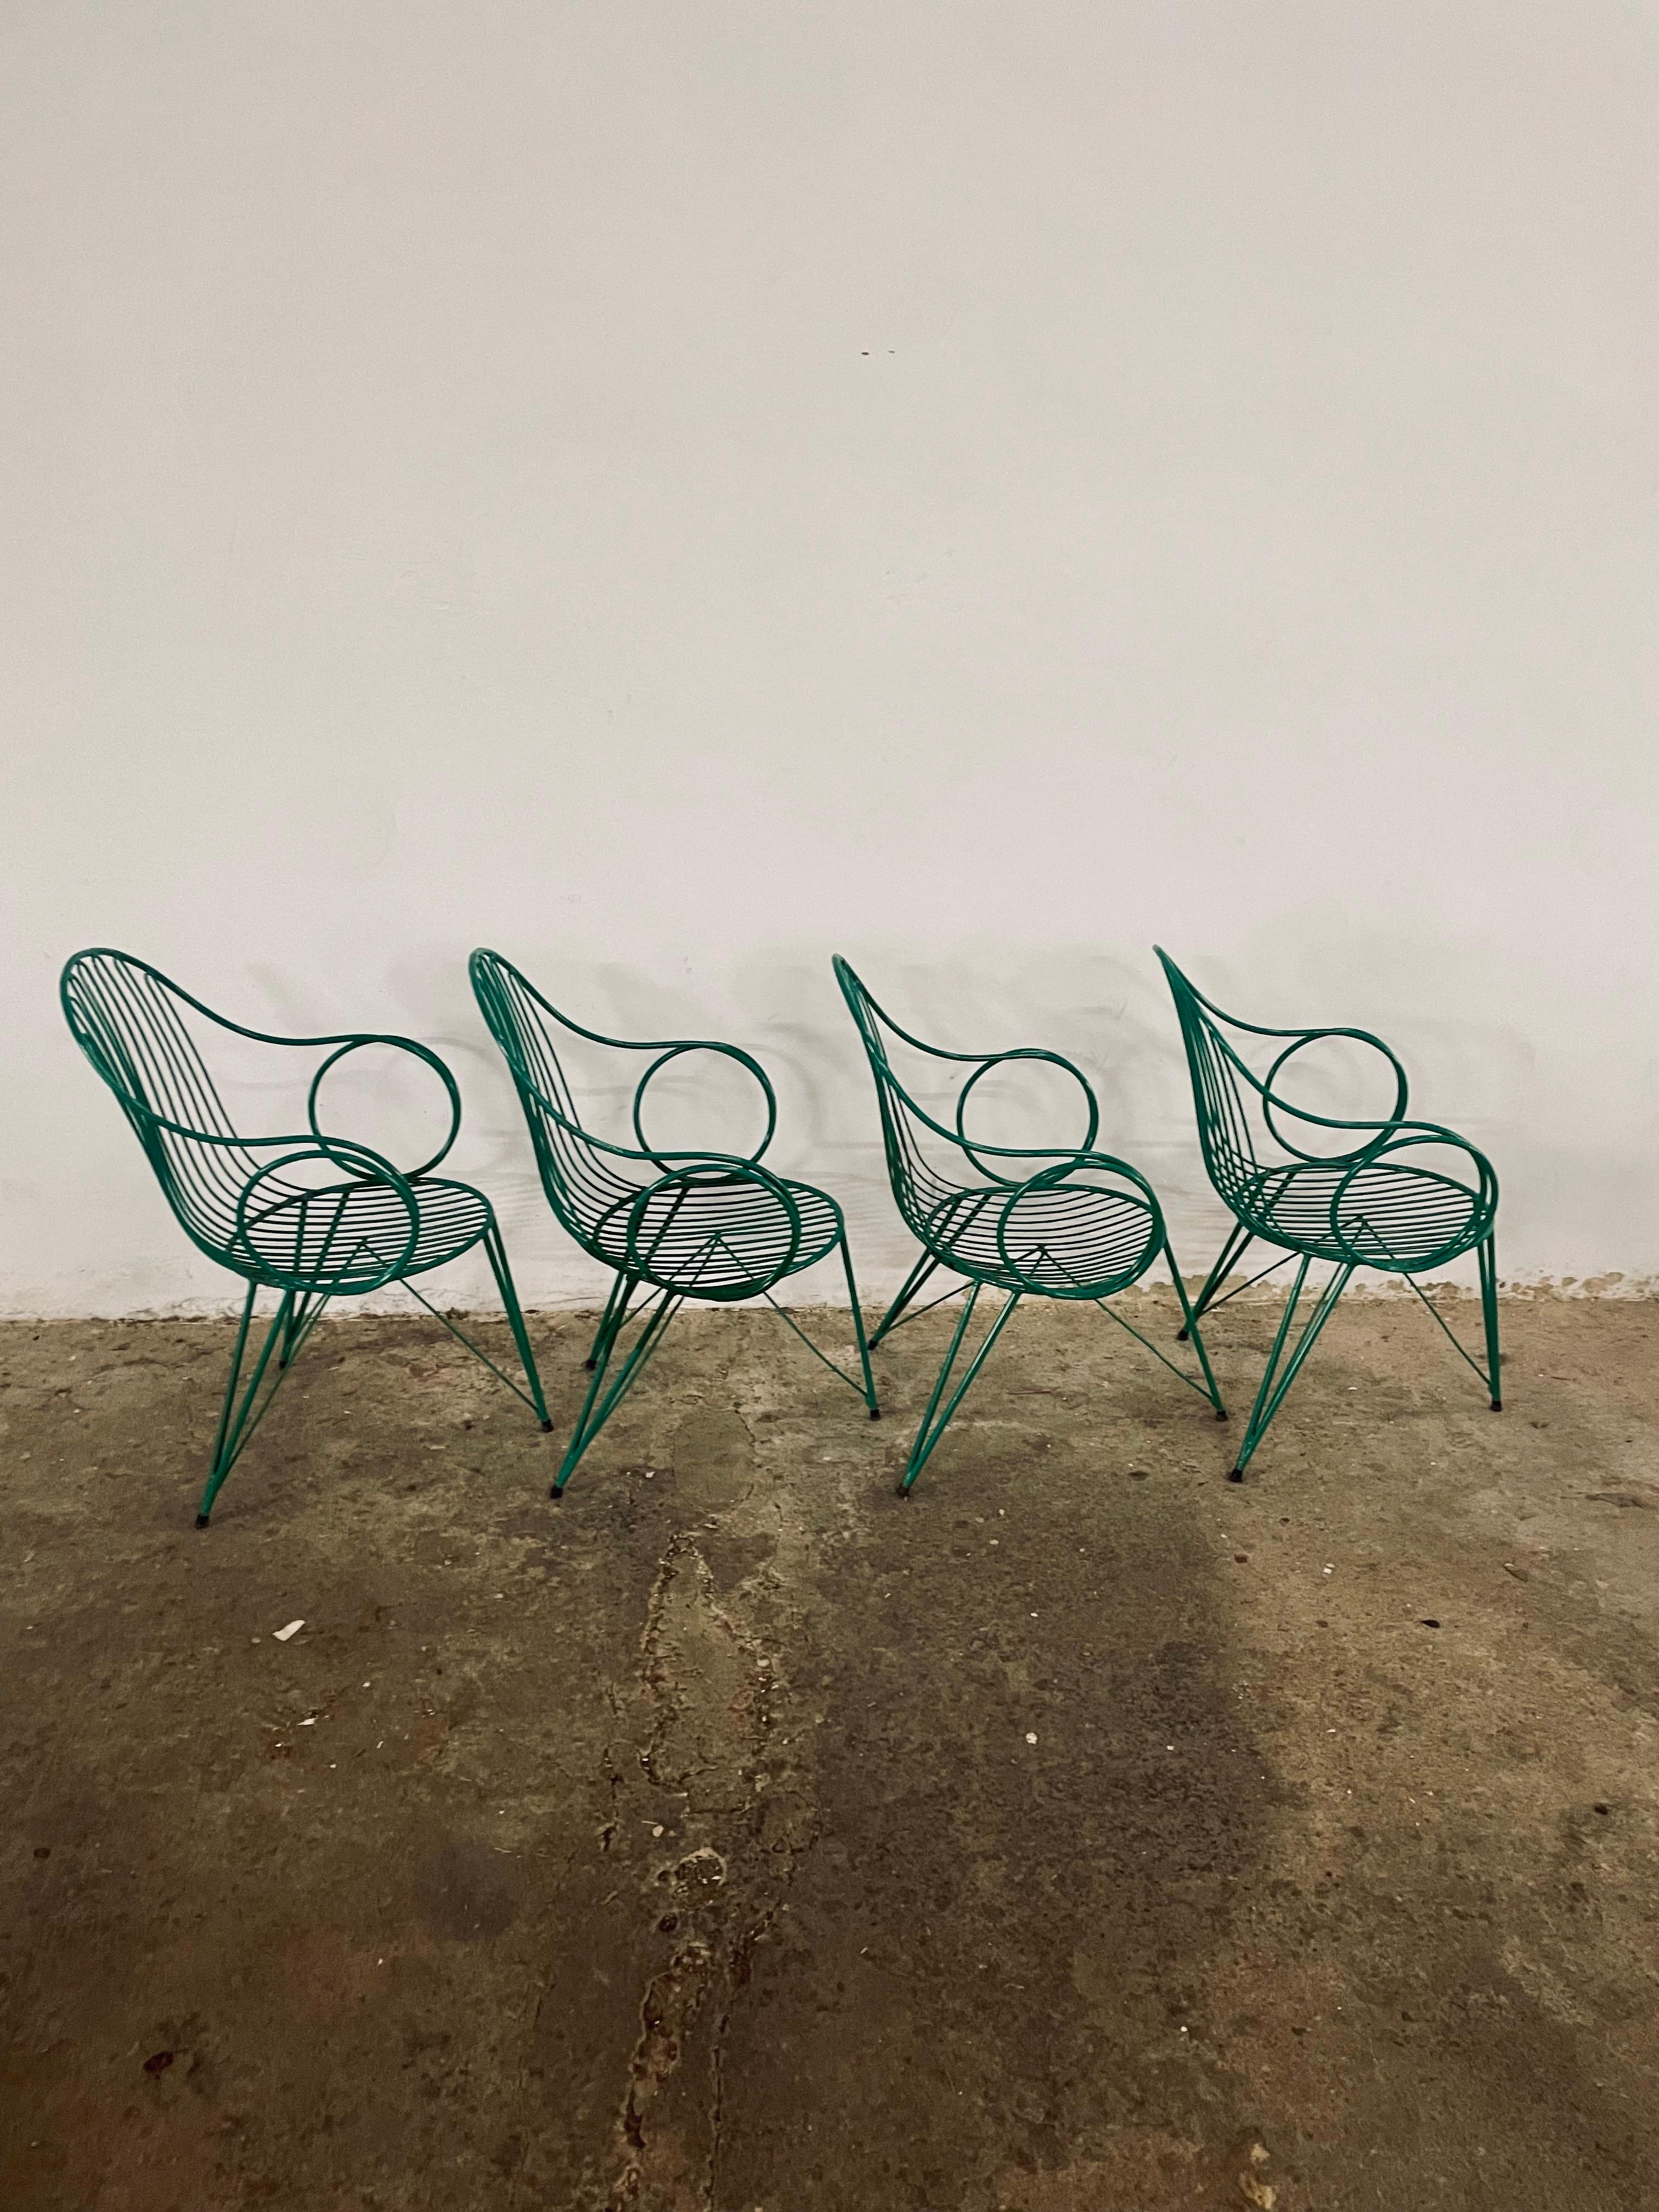 Set of 4 Rare French Vintage metal garden three-legged chairs or dining chairs, original color, great patina, 
These chairs remain fully functional, they show signs of age through scuffs, dings, faded finishes, some surface defects, and visible